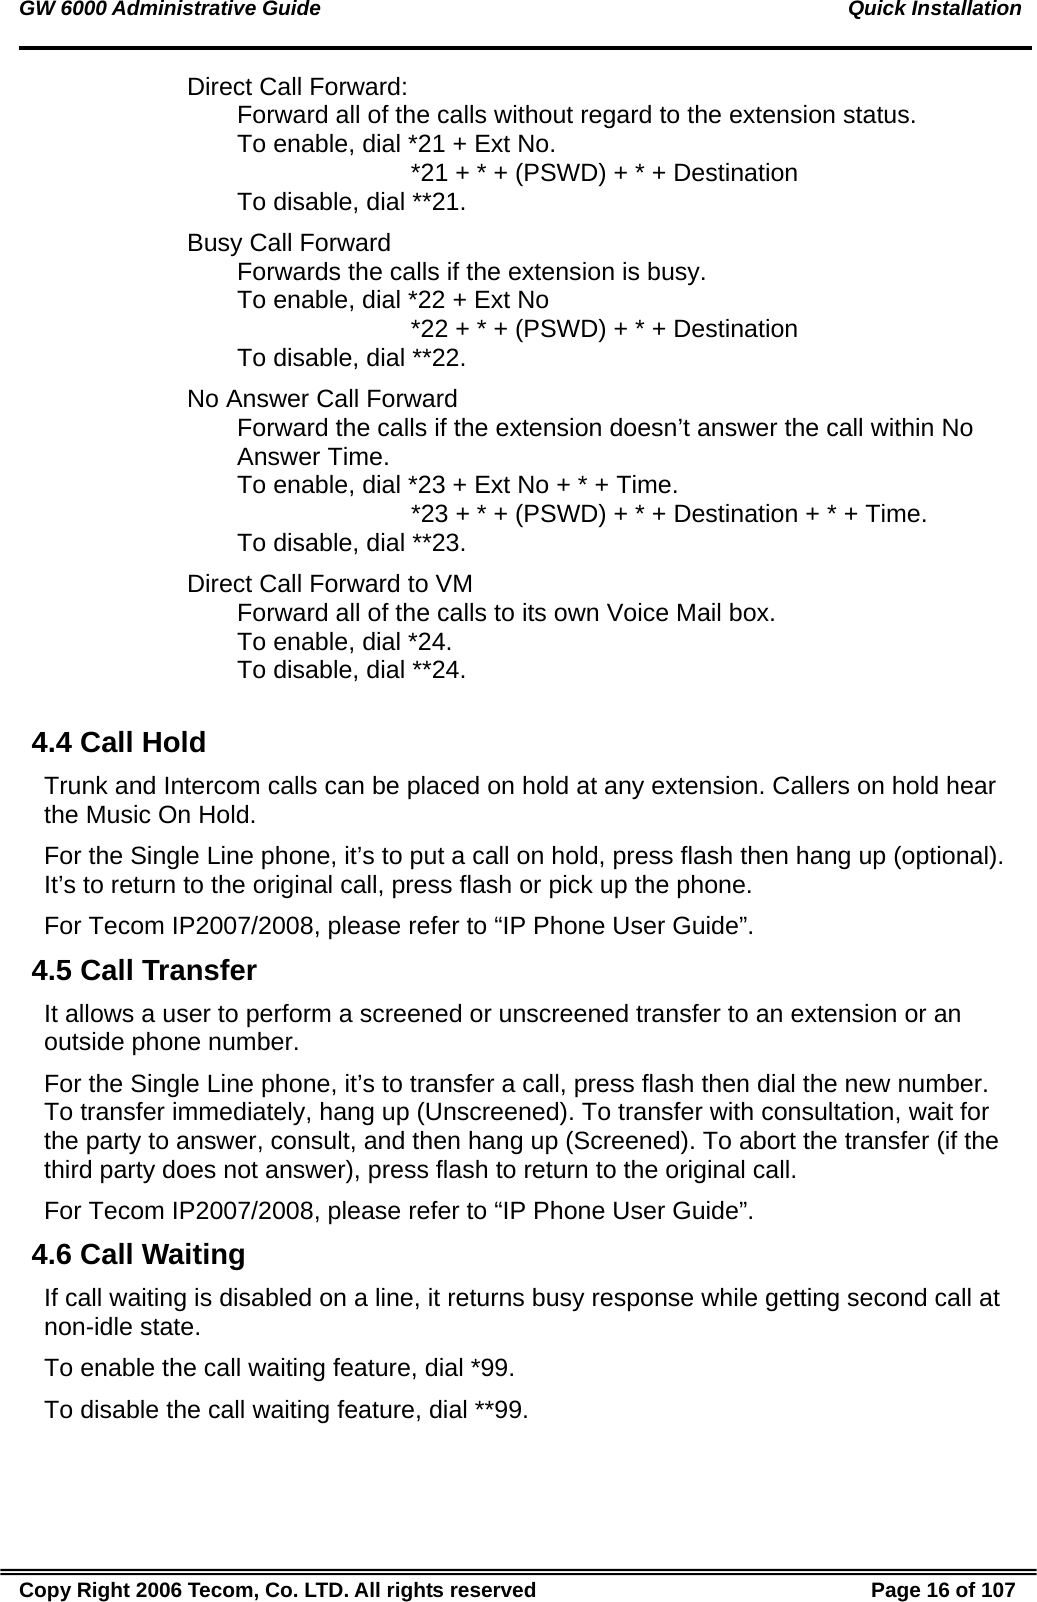 GW 6000 Administrative Guide                                                                                           Quick Installation Direct Call Forward:  Forward all of the calls without regard to the extension status. To enable, dial *21 + Ext No.                          *21 + * + (PSWD) + * + Destination To disable, dial **21. Busy Call Forward Forwards the calls if the extension is busy. To enable, dial *22 + Ext No                          *22 + * + (PSWD) + * + Destination To disable, dial **22. No Answer Call Forward Forward the calls if the extension doesn’t answer the call within No Answer Time. To enable, dial *23 + Ext No + * + Time.                          *23 + * + (PSWD) + * + Destination + * + Time.  To disable, dial **23. Direct Call Forward to VM Forward all of the calls to its own Voice Mail box. To enable, dial *24. To disable, dial **24.  4.4 Call Hold Trunk and Intercom calls can be placed on hold at any extension. Callers on hold hear the Music On Hold. For the Single Line phone, it’s to put a call on hold, press flash then hang up (optional). It’s to return to the original call, press flash or pick up the phone. For Tecom IP2007/2008, please refer to “IP Phone User Guide”. 4.5 Call Transfer It allows a user to perform a screened or unscreened transfer to an extension or an outside phone number. For the Single Line phone, it’s to transfer a call, press flash then dial the new number. To transfer immediately, hang up (Unscreened). To transfer with consultation, wait for the party to answer, consult, and then hang up (Screened). To abort the transfer (if the third party does not answer), press flash to return to the original call. For Tecom IP2007/2008, please refer to “IP Phone User Guide”. 4.6 Call Waiting If call waiting is disabled on a line, it returns busy response while getting second call at non-idle state. To enable the call waiting feature, dial *99. To disable the call waiting feature, dial **99. Copy Right 2006 Tecom, Co. LTD. All rights reserved  Page 16 of 107 